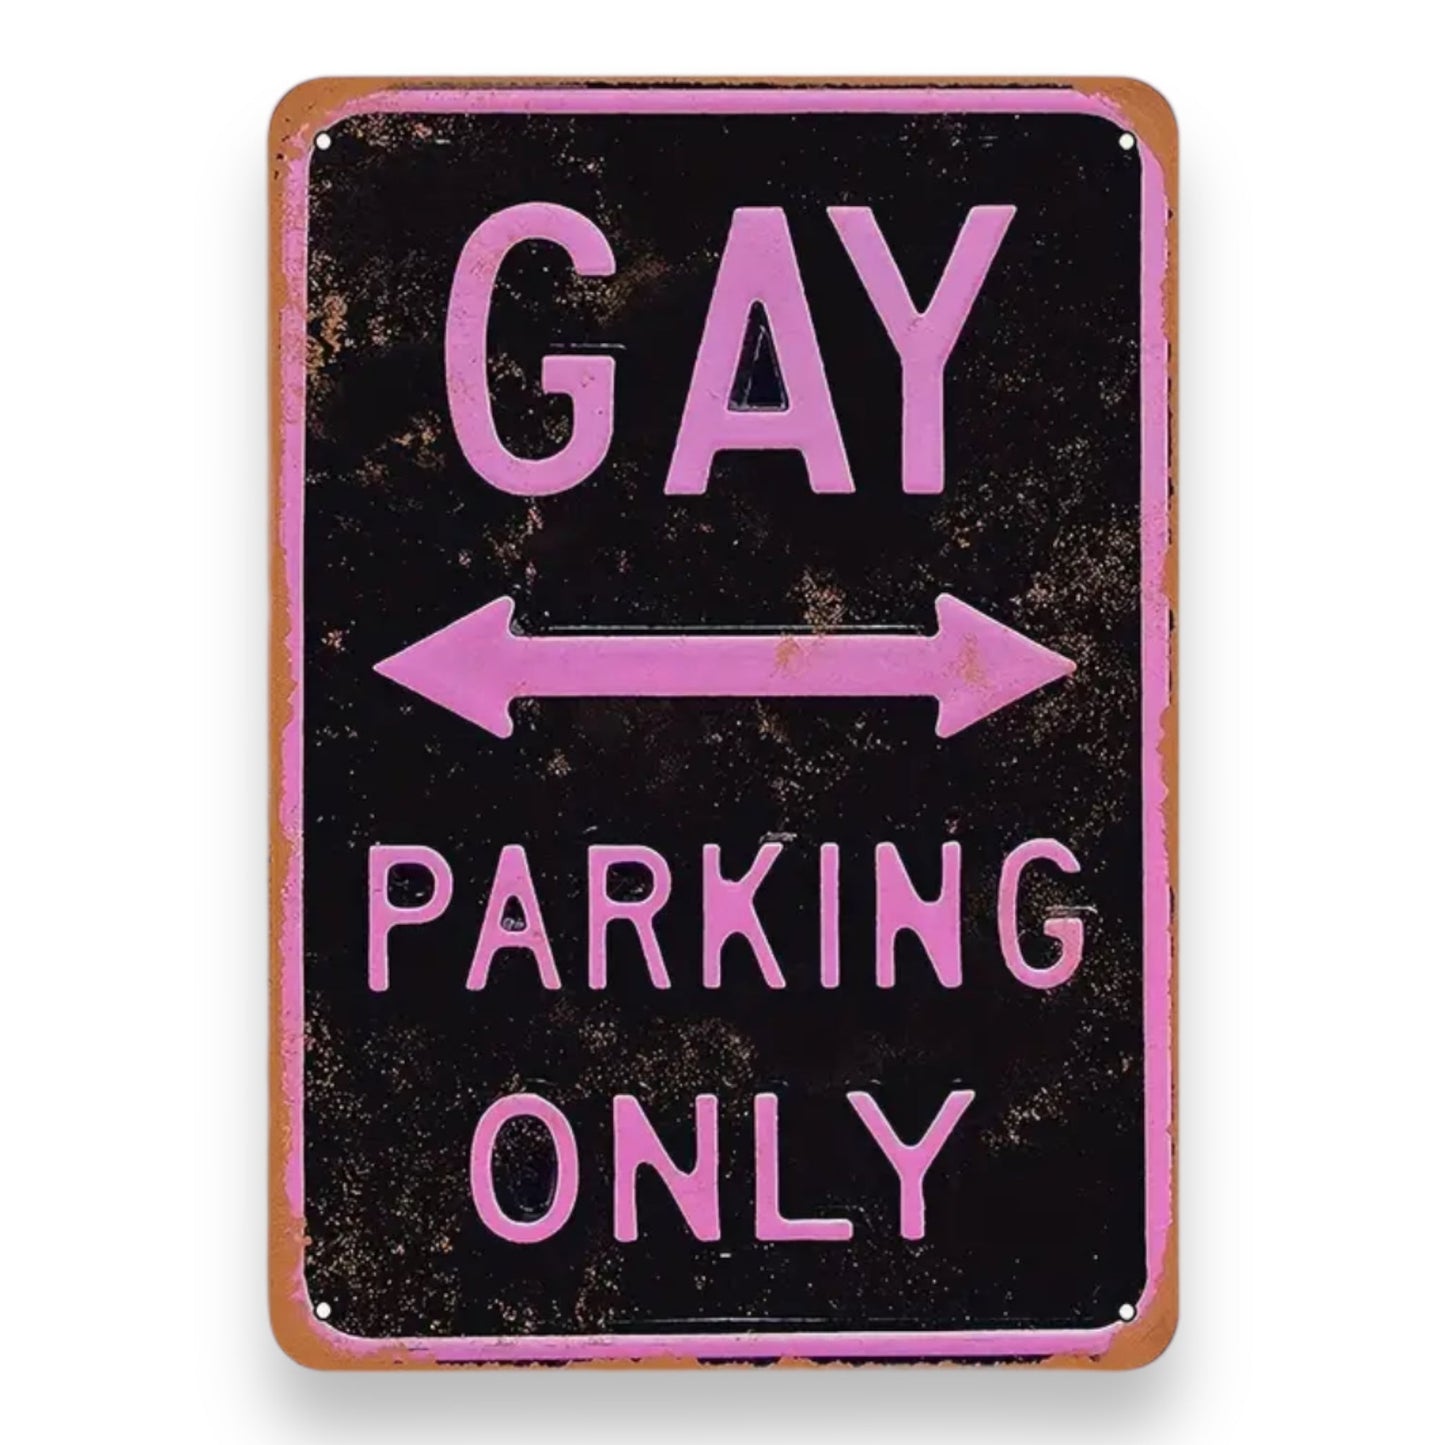 ,Gay Parking Only, Metal Sign - 20x30cm Stylish Parking Sign